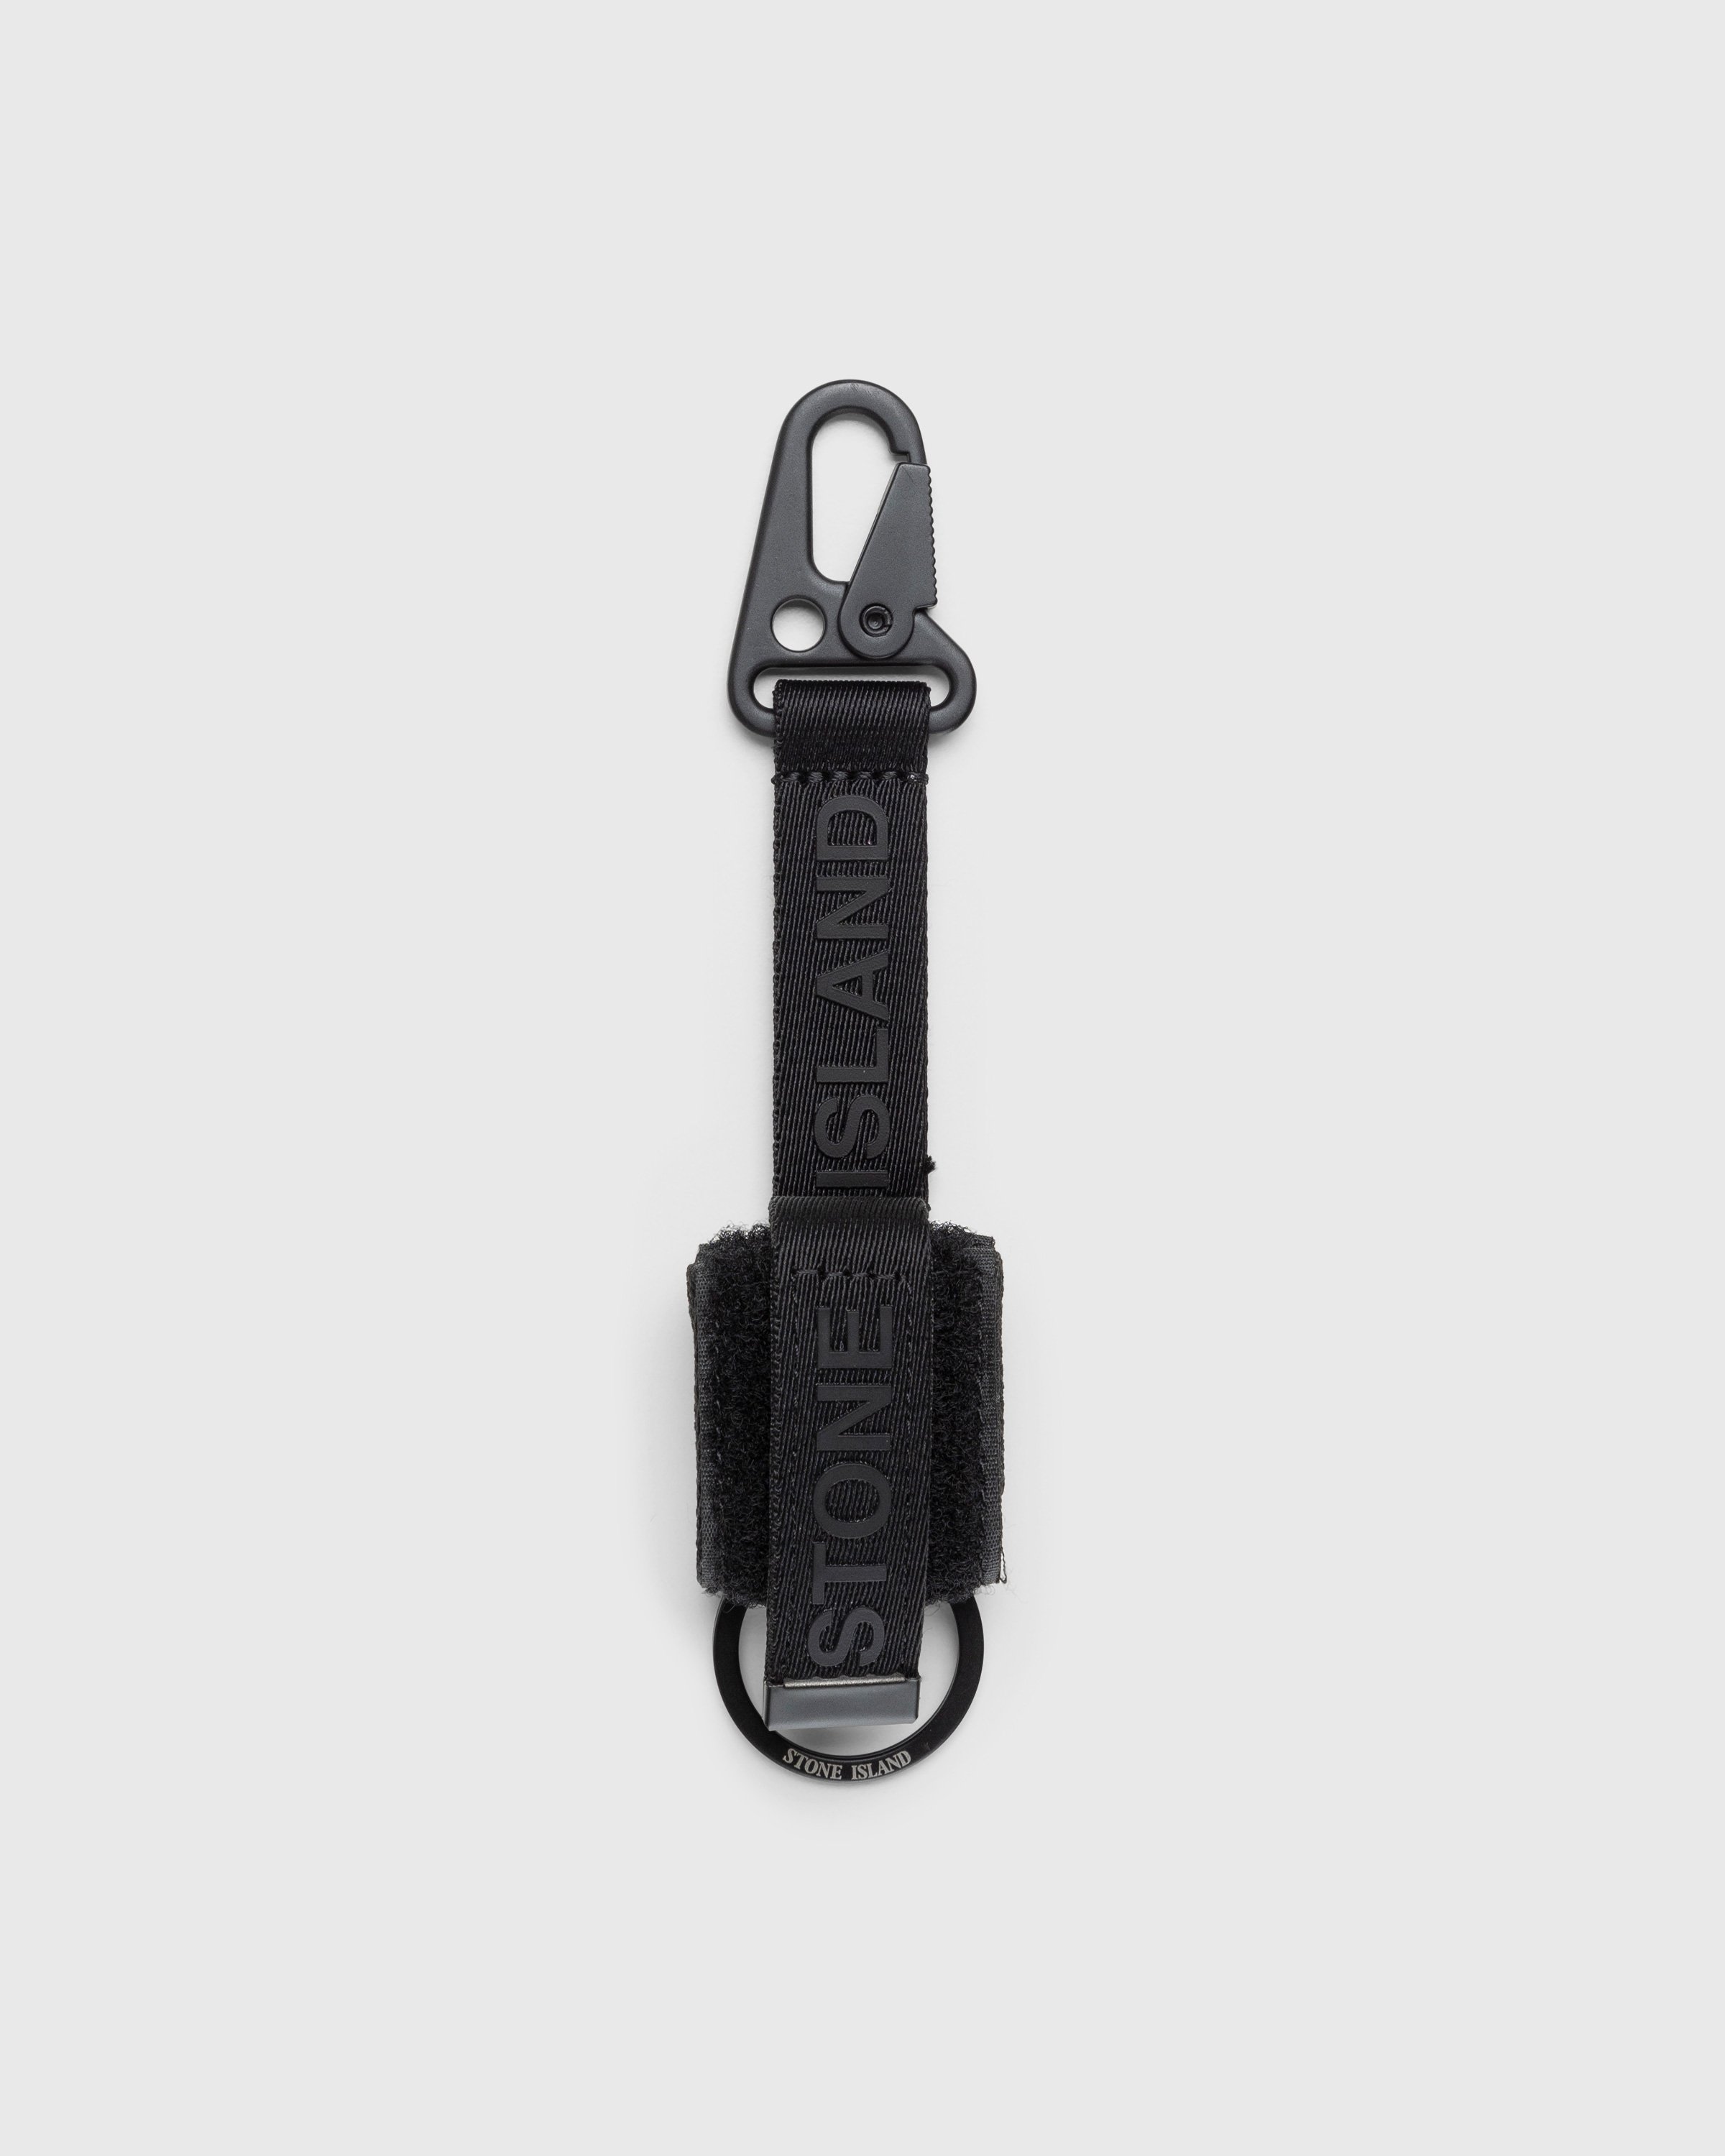 Stone Island - AirPods Case With Key Holder Black - Accessories - Black - Image 1